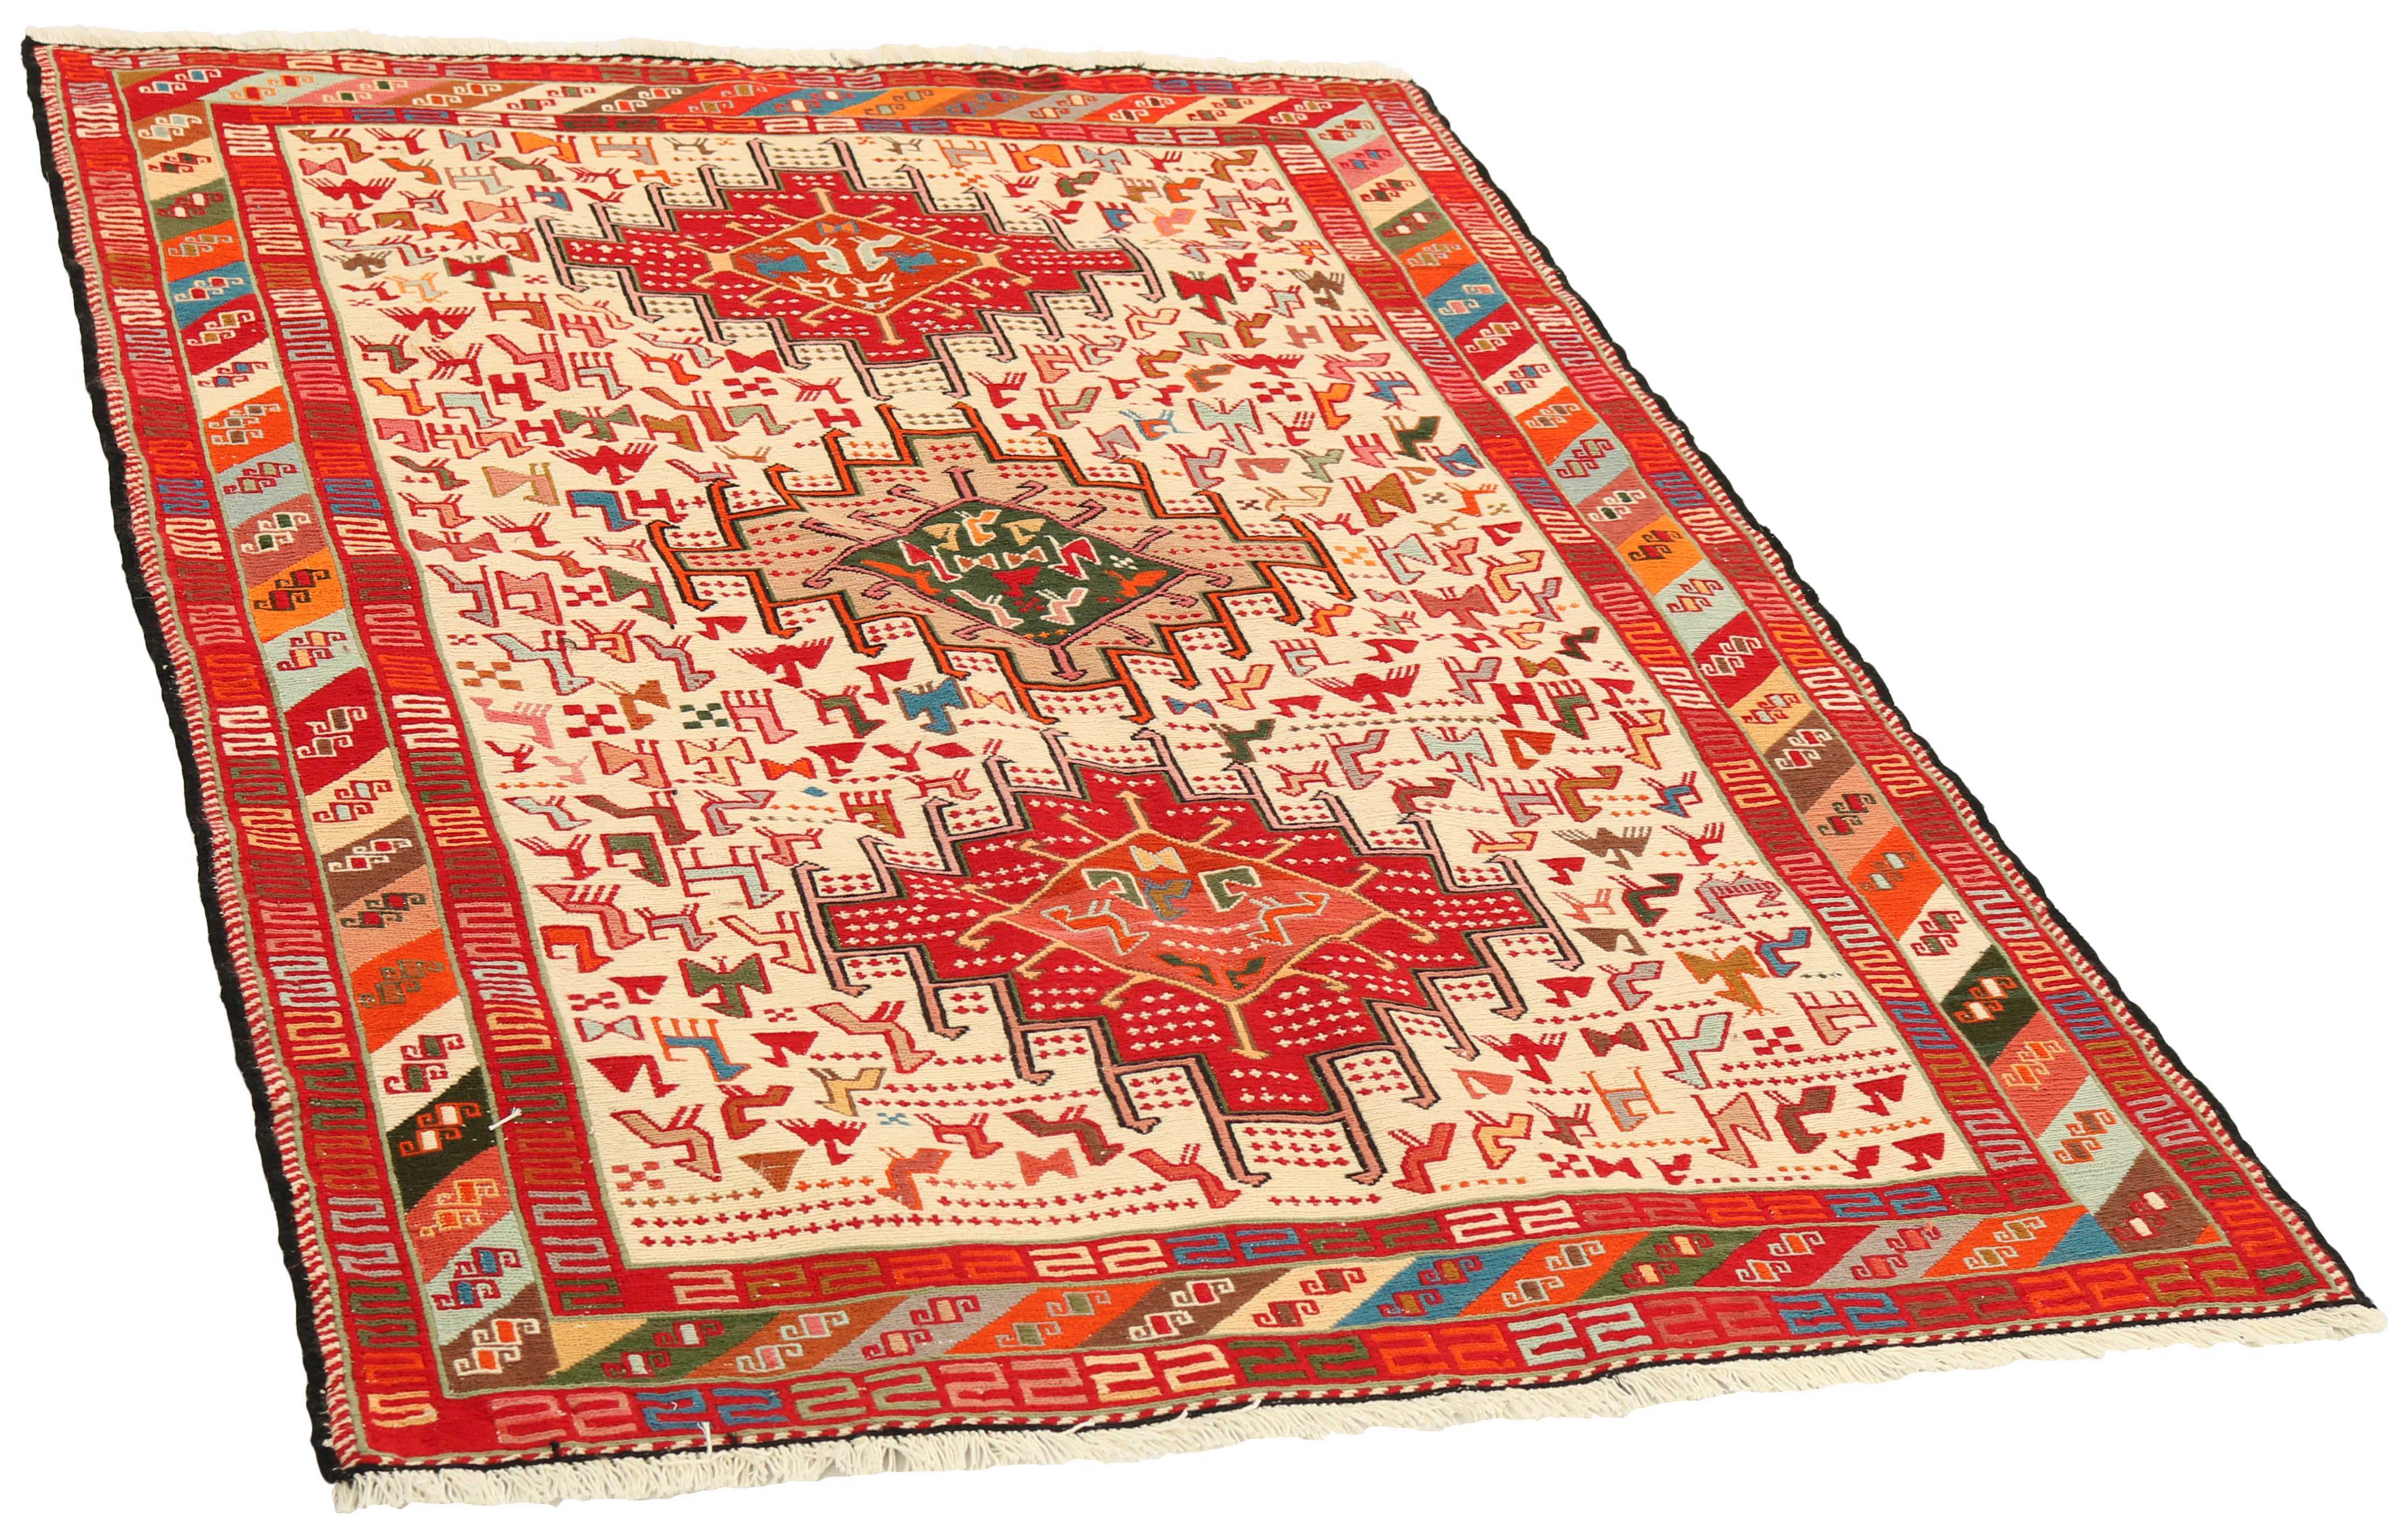 Bordered red and cream Soumak rug with multicolour animal pattern
